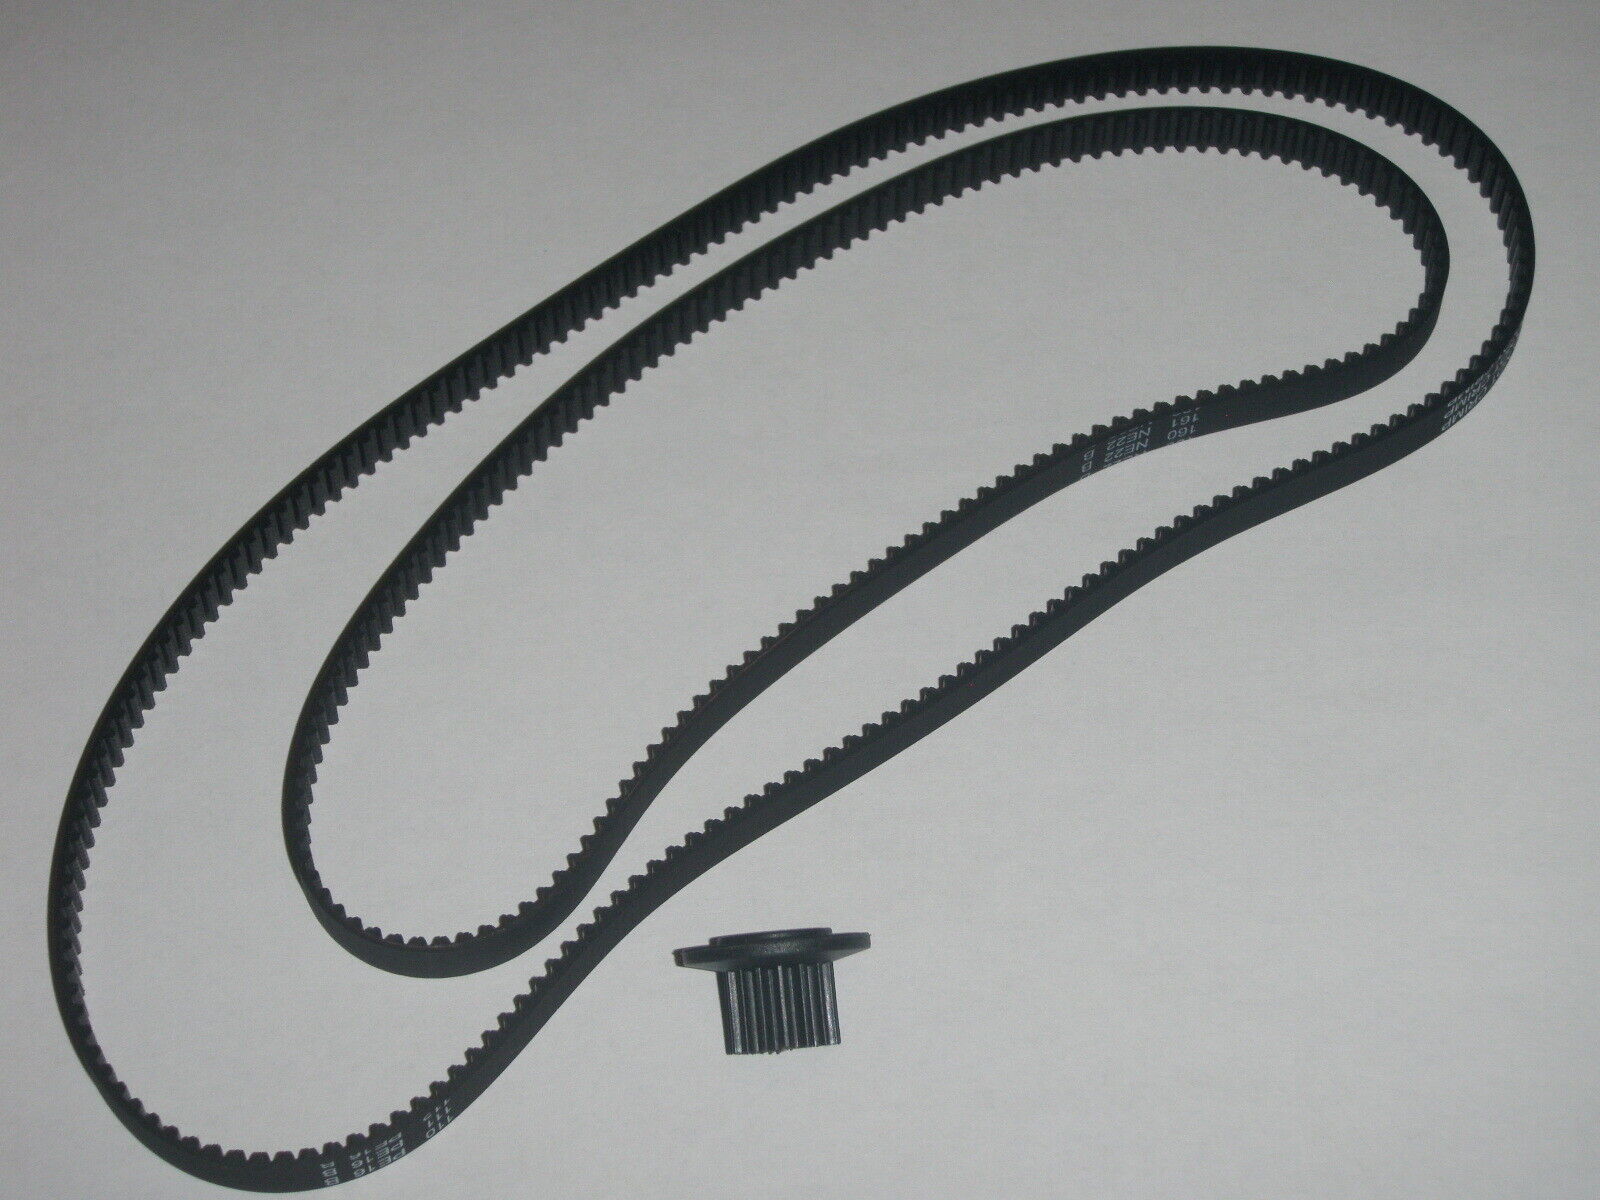 Primary image for Belts for Wolfgang Puck Bread Maker Model BBME025 only (Choose 1 or Set + Gear)